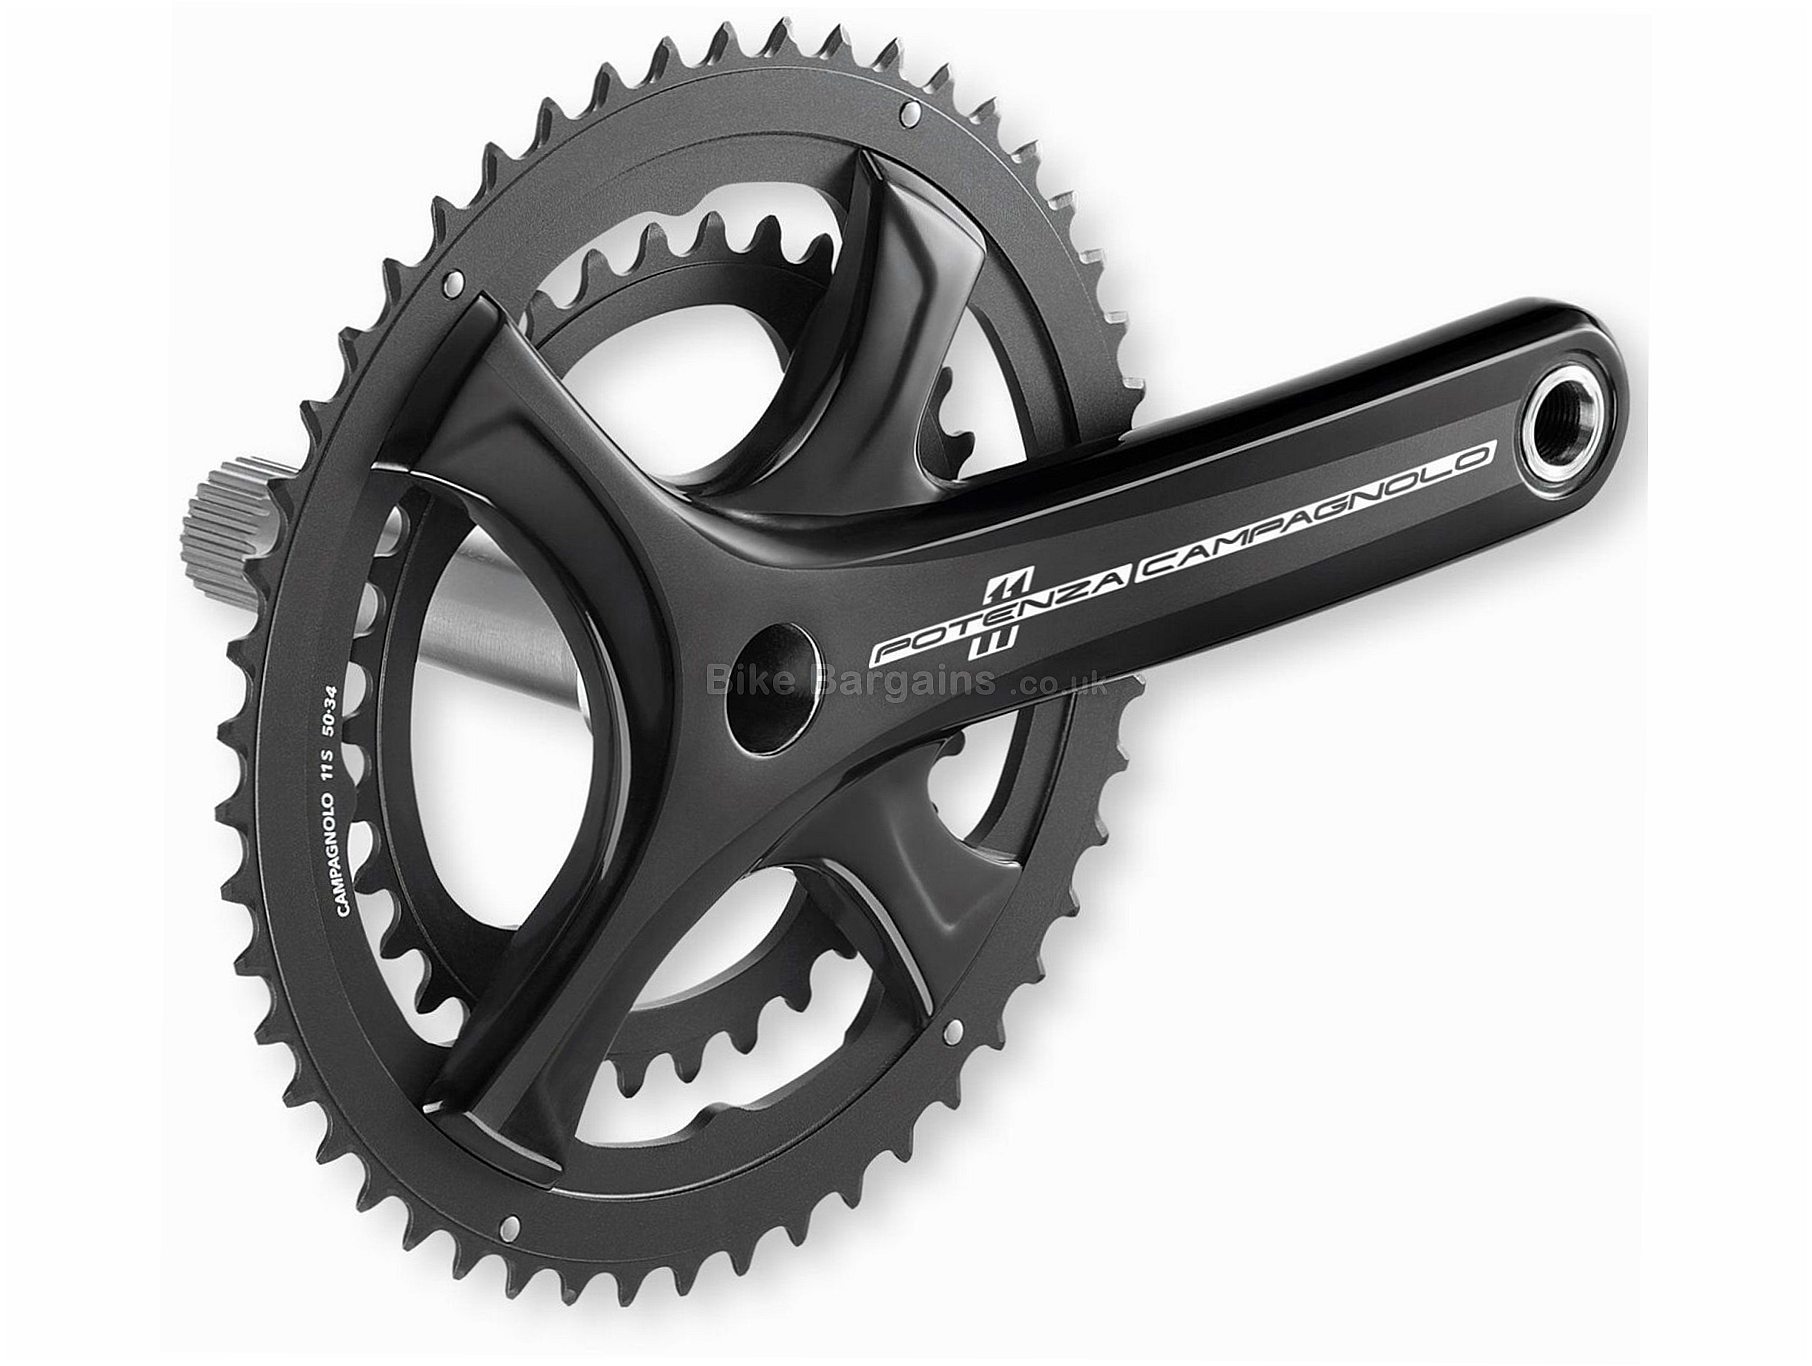 Cheap Campagnolo Cycling Component Deals